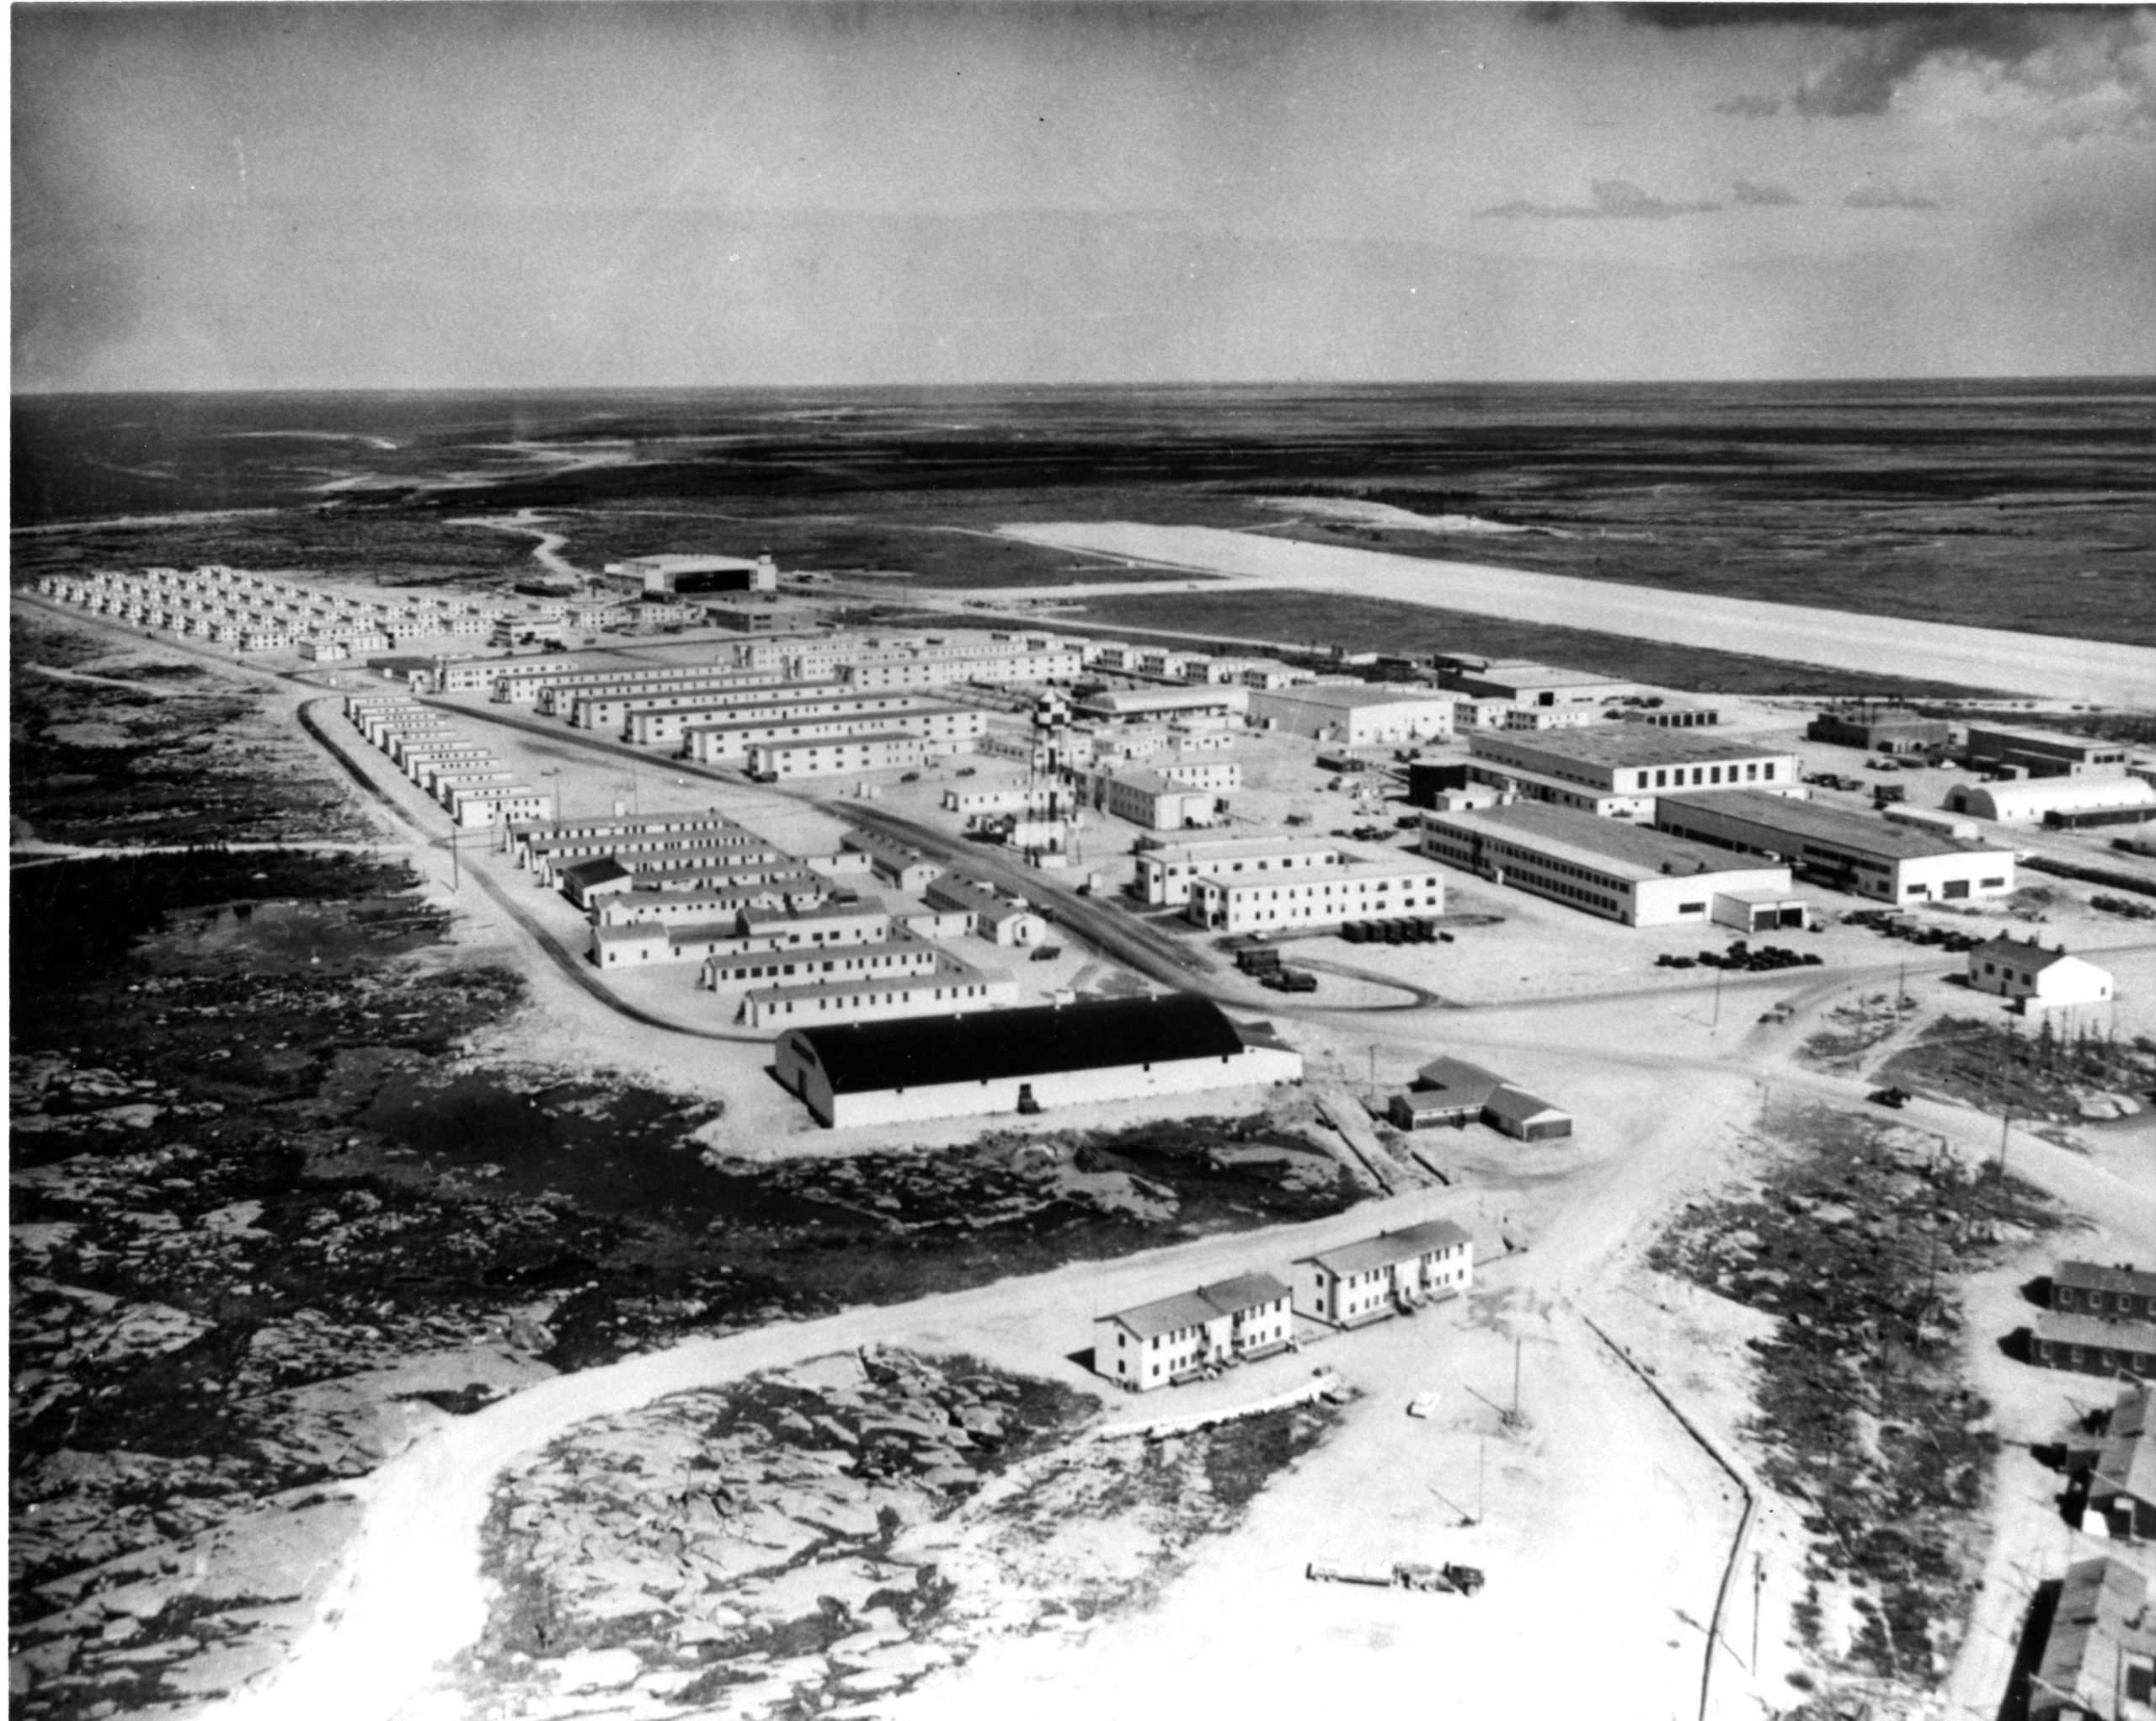 Black and white aerial photograph looking down on rows of barracks.